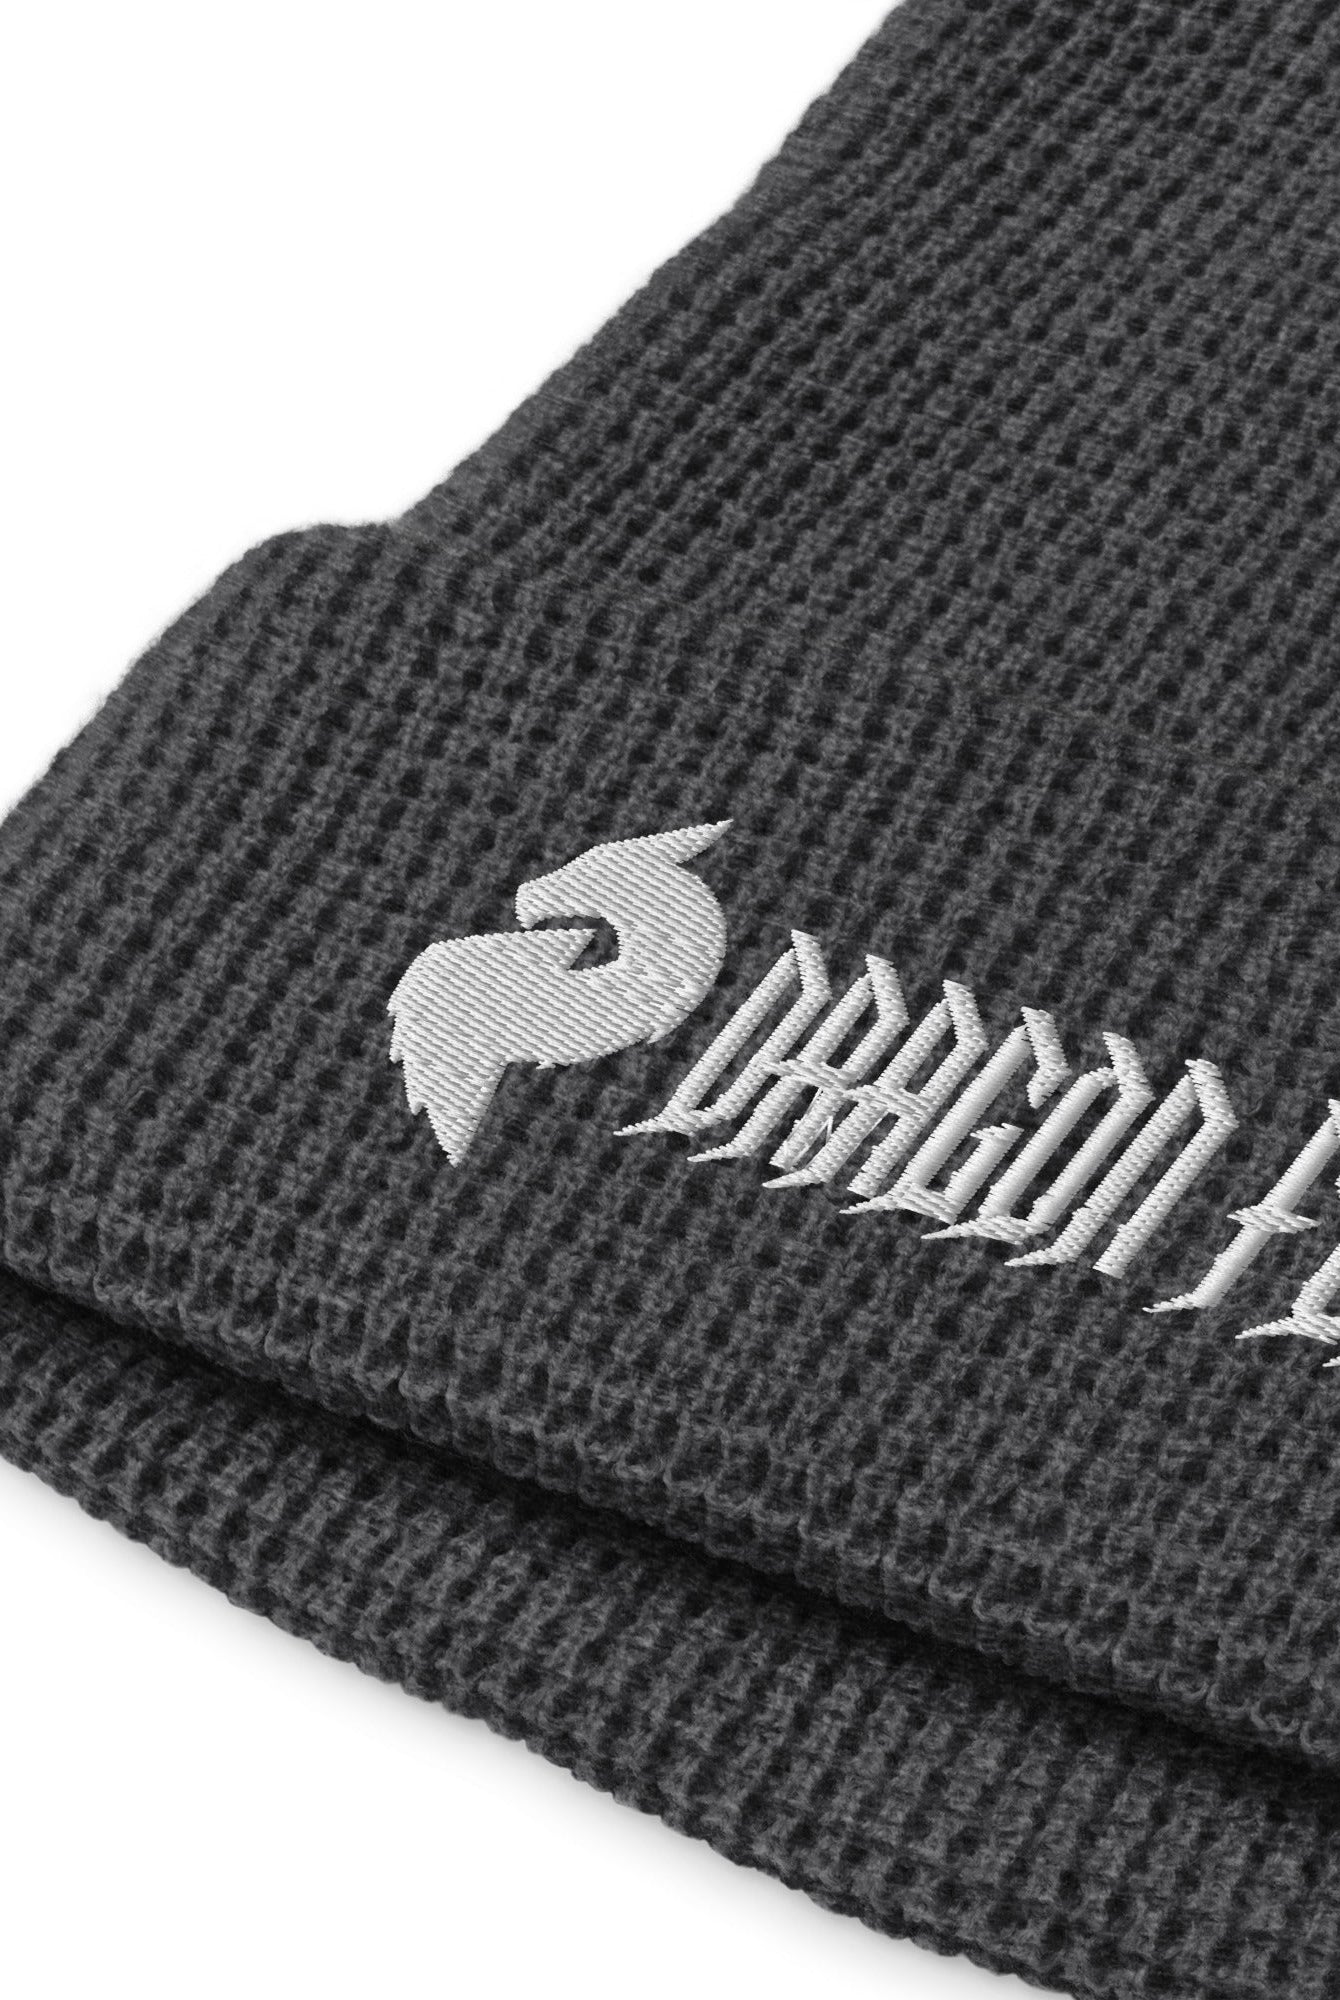 His or Hers Dragon Foxx™ Waffle beanie in 7 Colors - His or Hers Dragon Foxx™ Waffle beanie - DRAGON FOXX™ - His or Hers Dragon Foxx™ Waffle beanie in 7 Colors - 3986040_16178 - Heather Charcoal - - Accessories - Beanie - Beanies